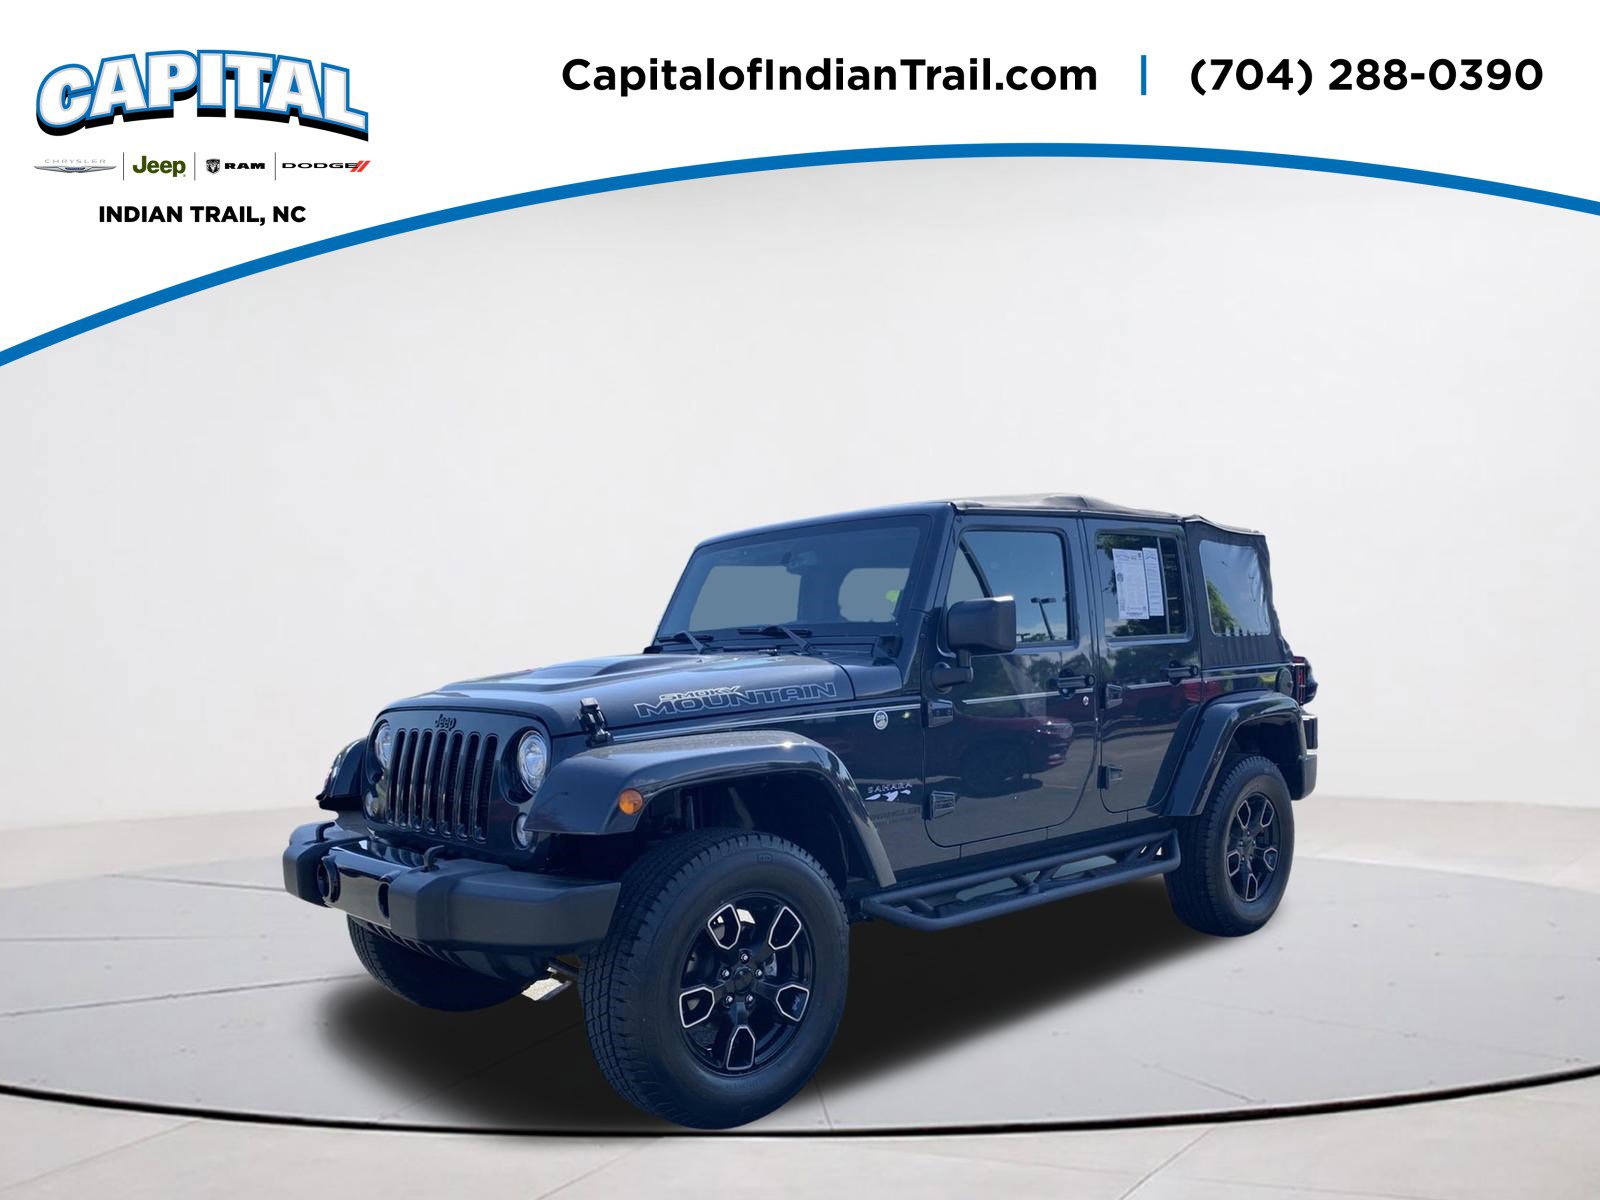 2017 Jeep Wrangler Indian Trail NC